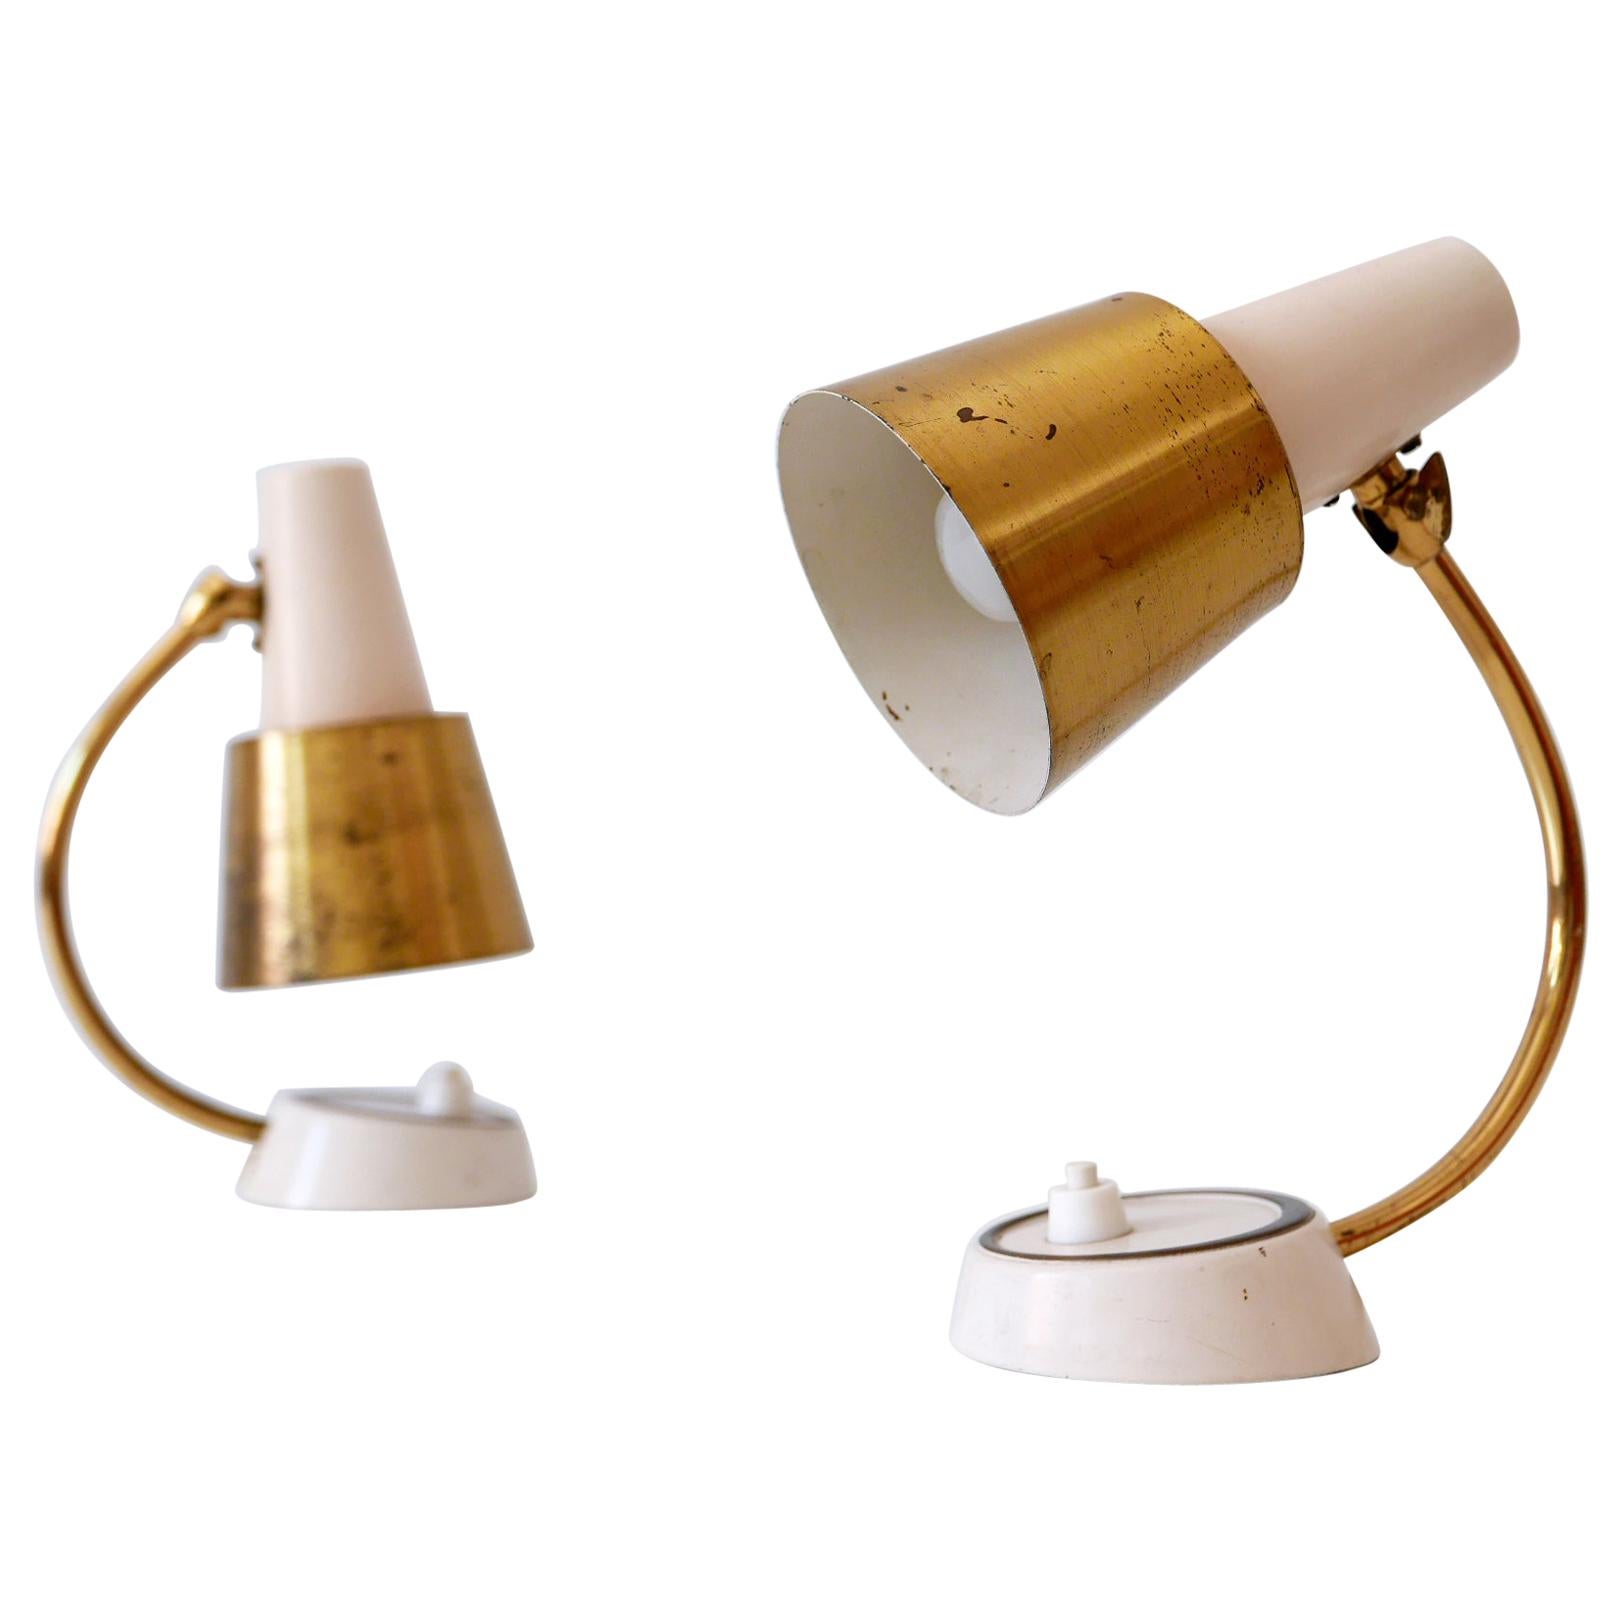 Set of Two Mid-Century Modern Bedside Table Lamps or Wall Lights, 1950s, Germany For Sale